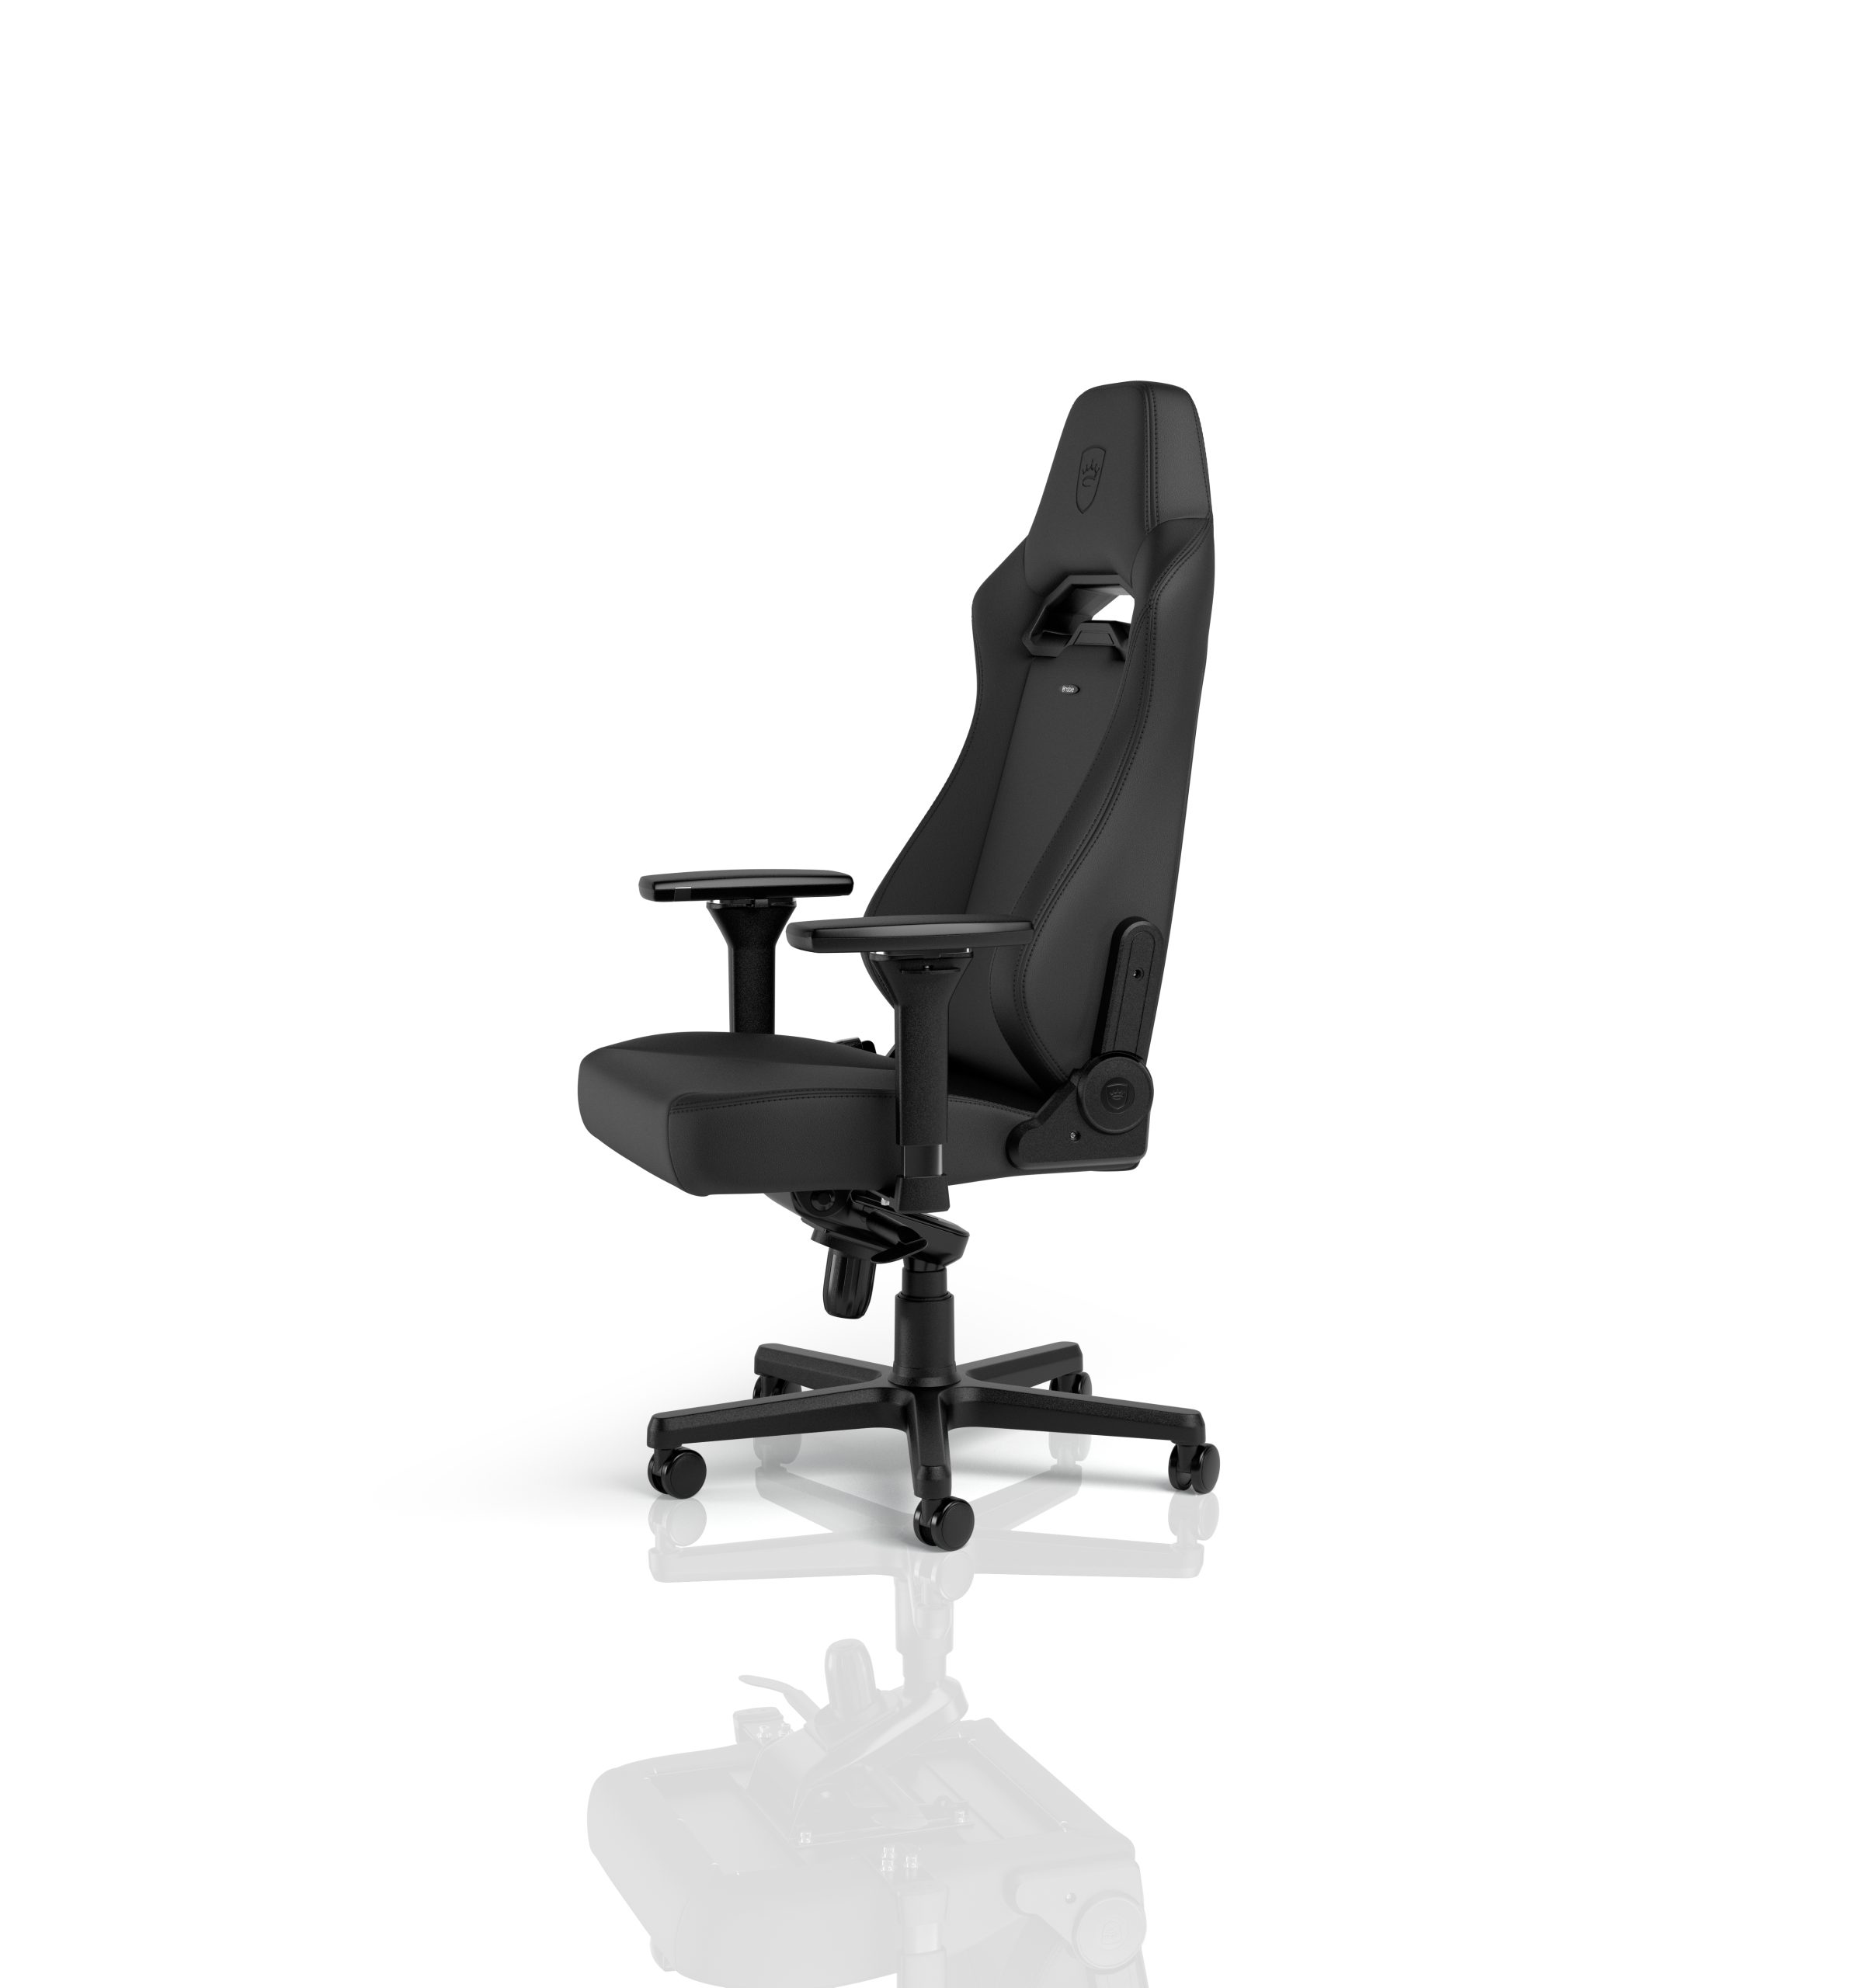 noblechairs Hero ST Black Edition Gaming Chair Review